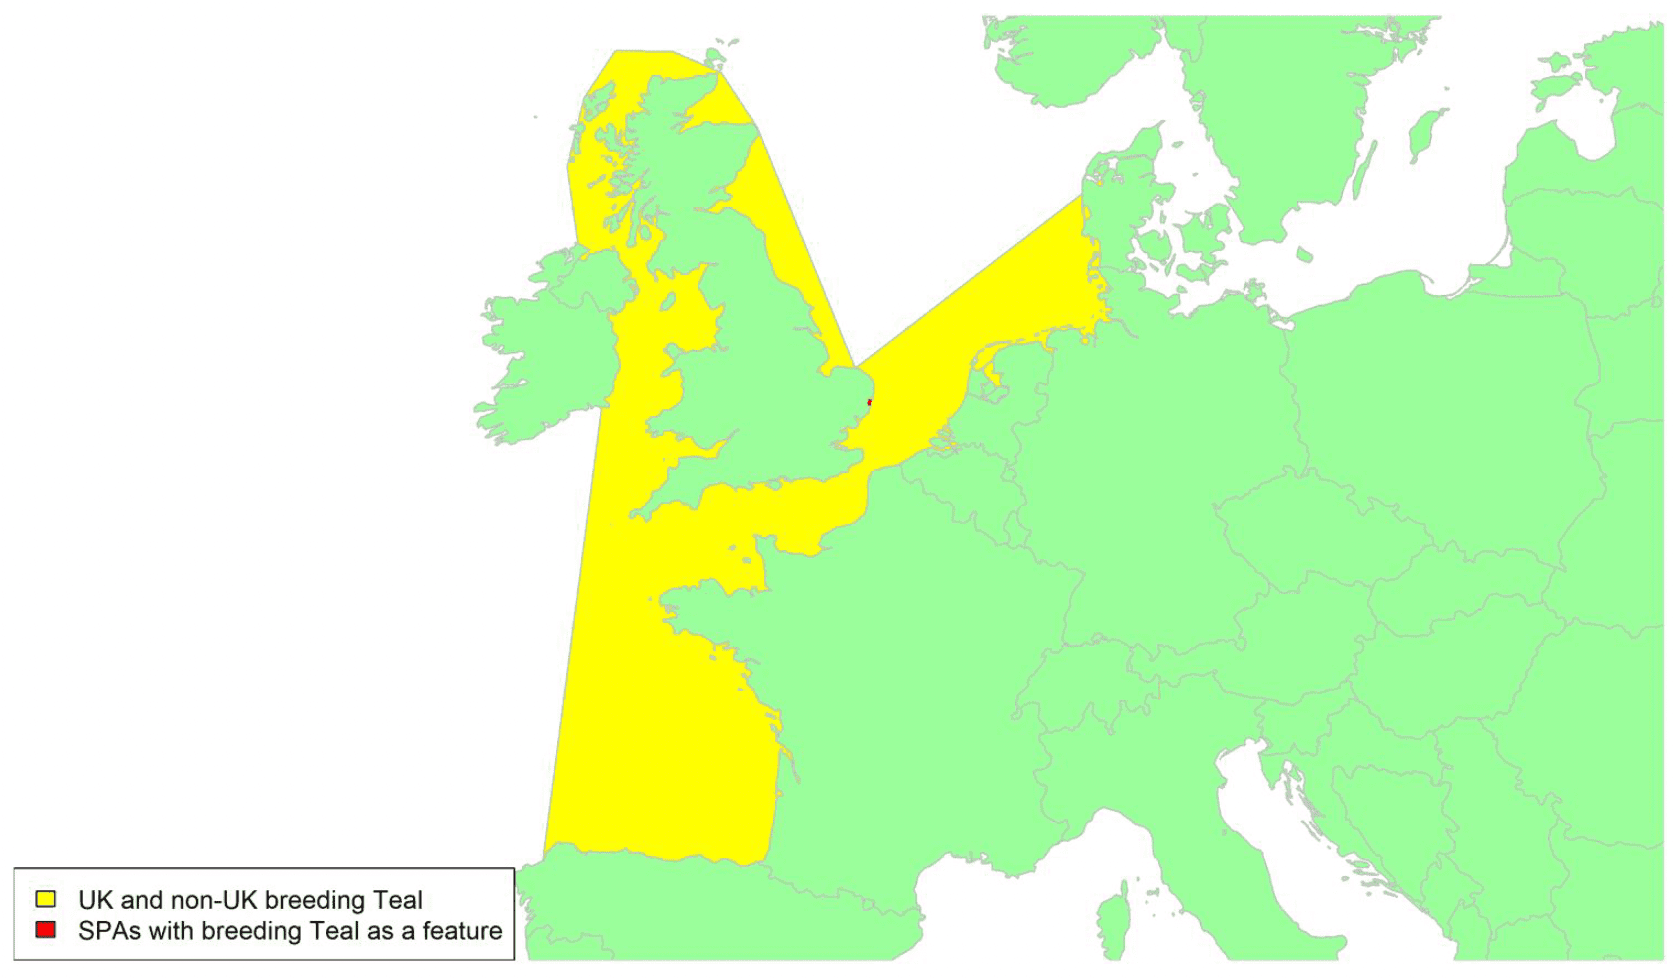 Map of North West Europe showing migratory routes and SPAs within the UK for breeding Teal as described in the text below.